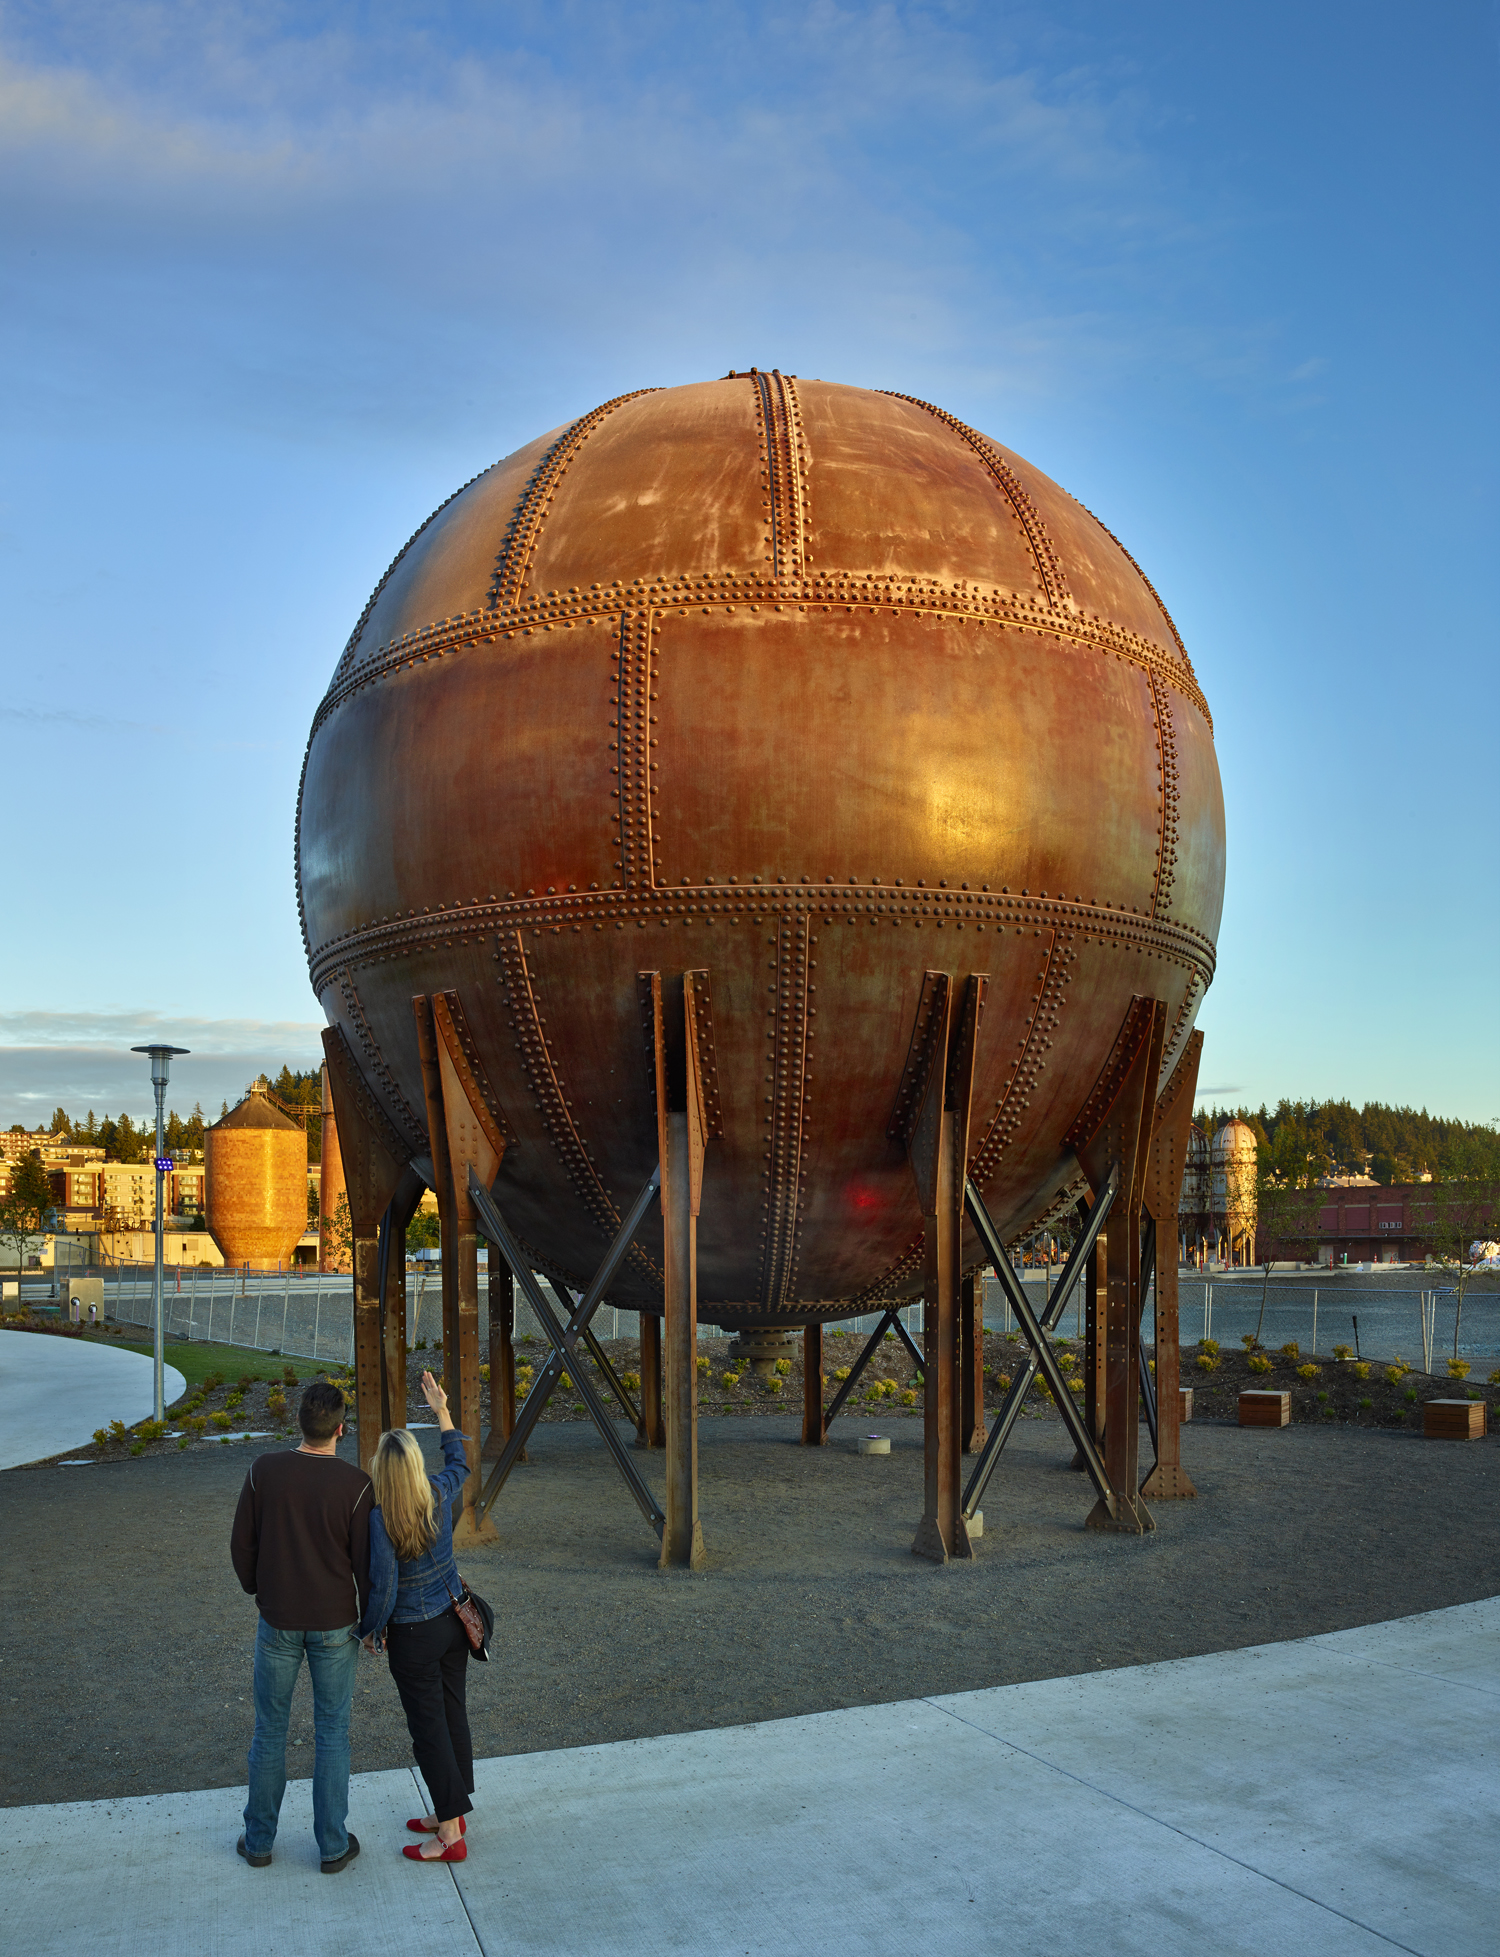 Acid Ball. Bellingham waterfront. Bellingham, Washington.© Copyright 2018 Benjamin Benschneider All Rights Reserved. Usage may be arranged by contacting Benjamin Benschneider Photography. Email: bbenschneider@comcast.net